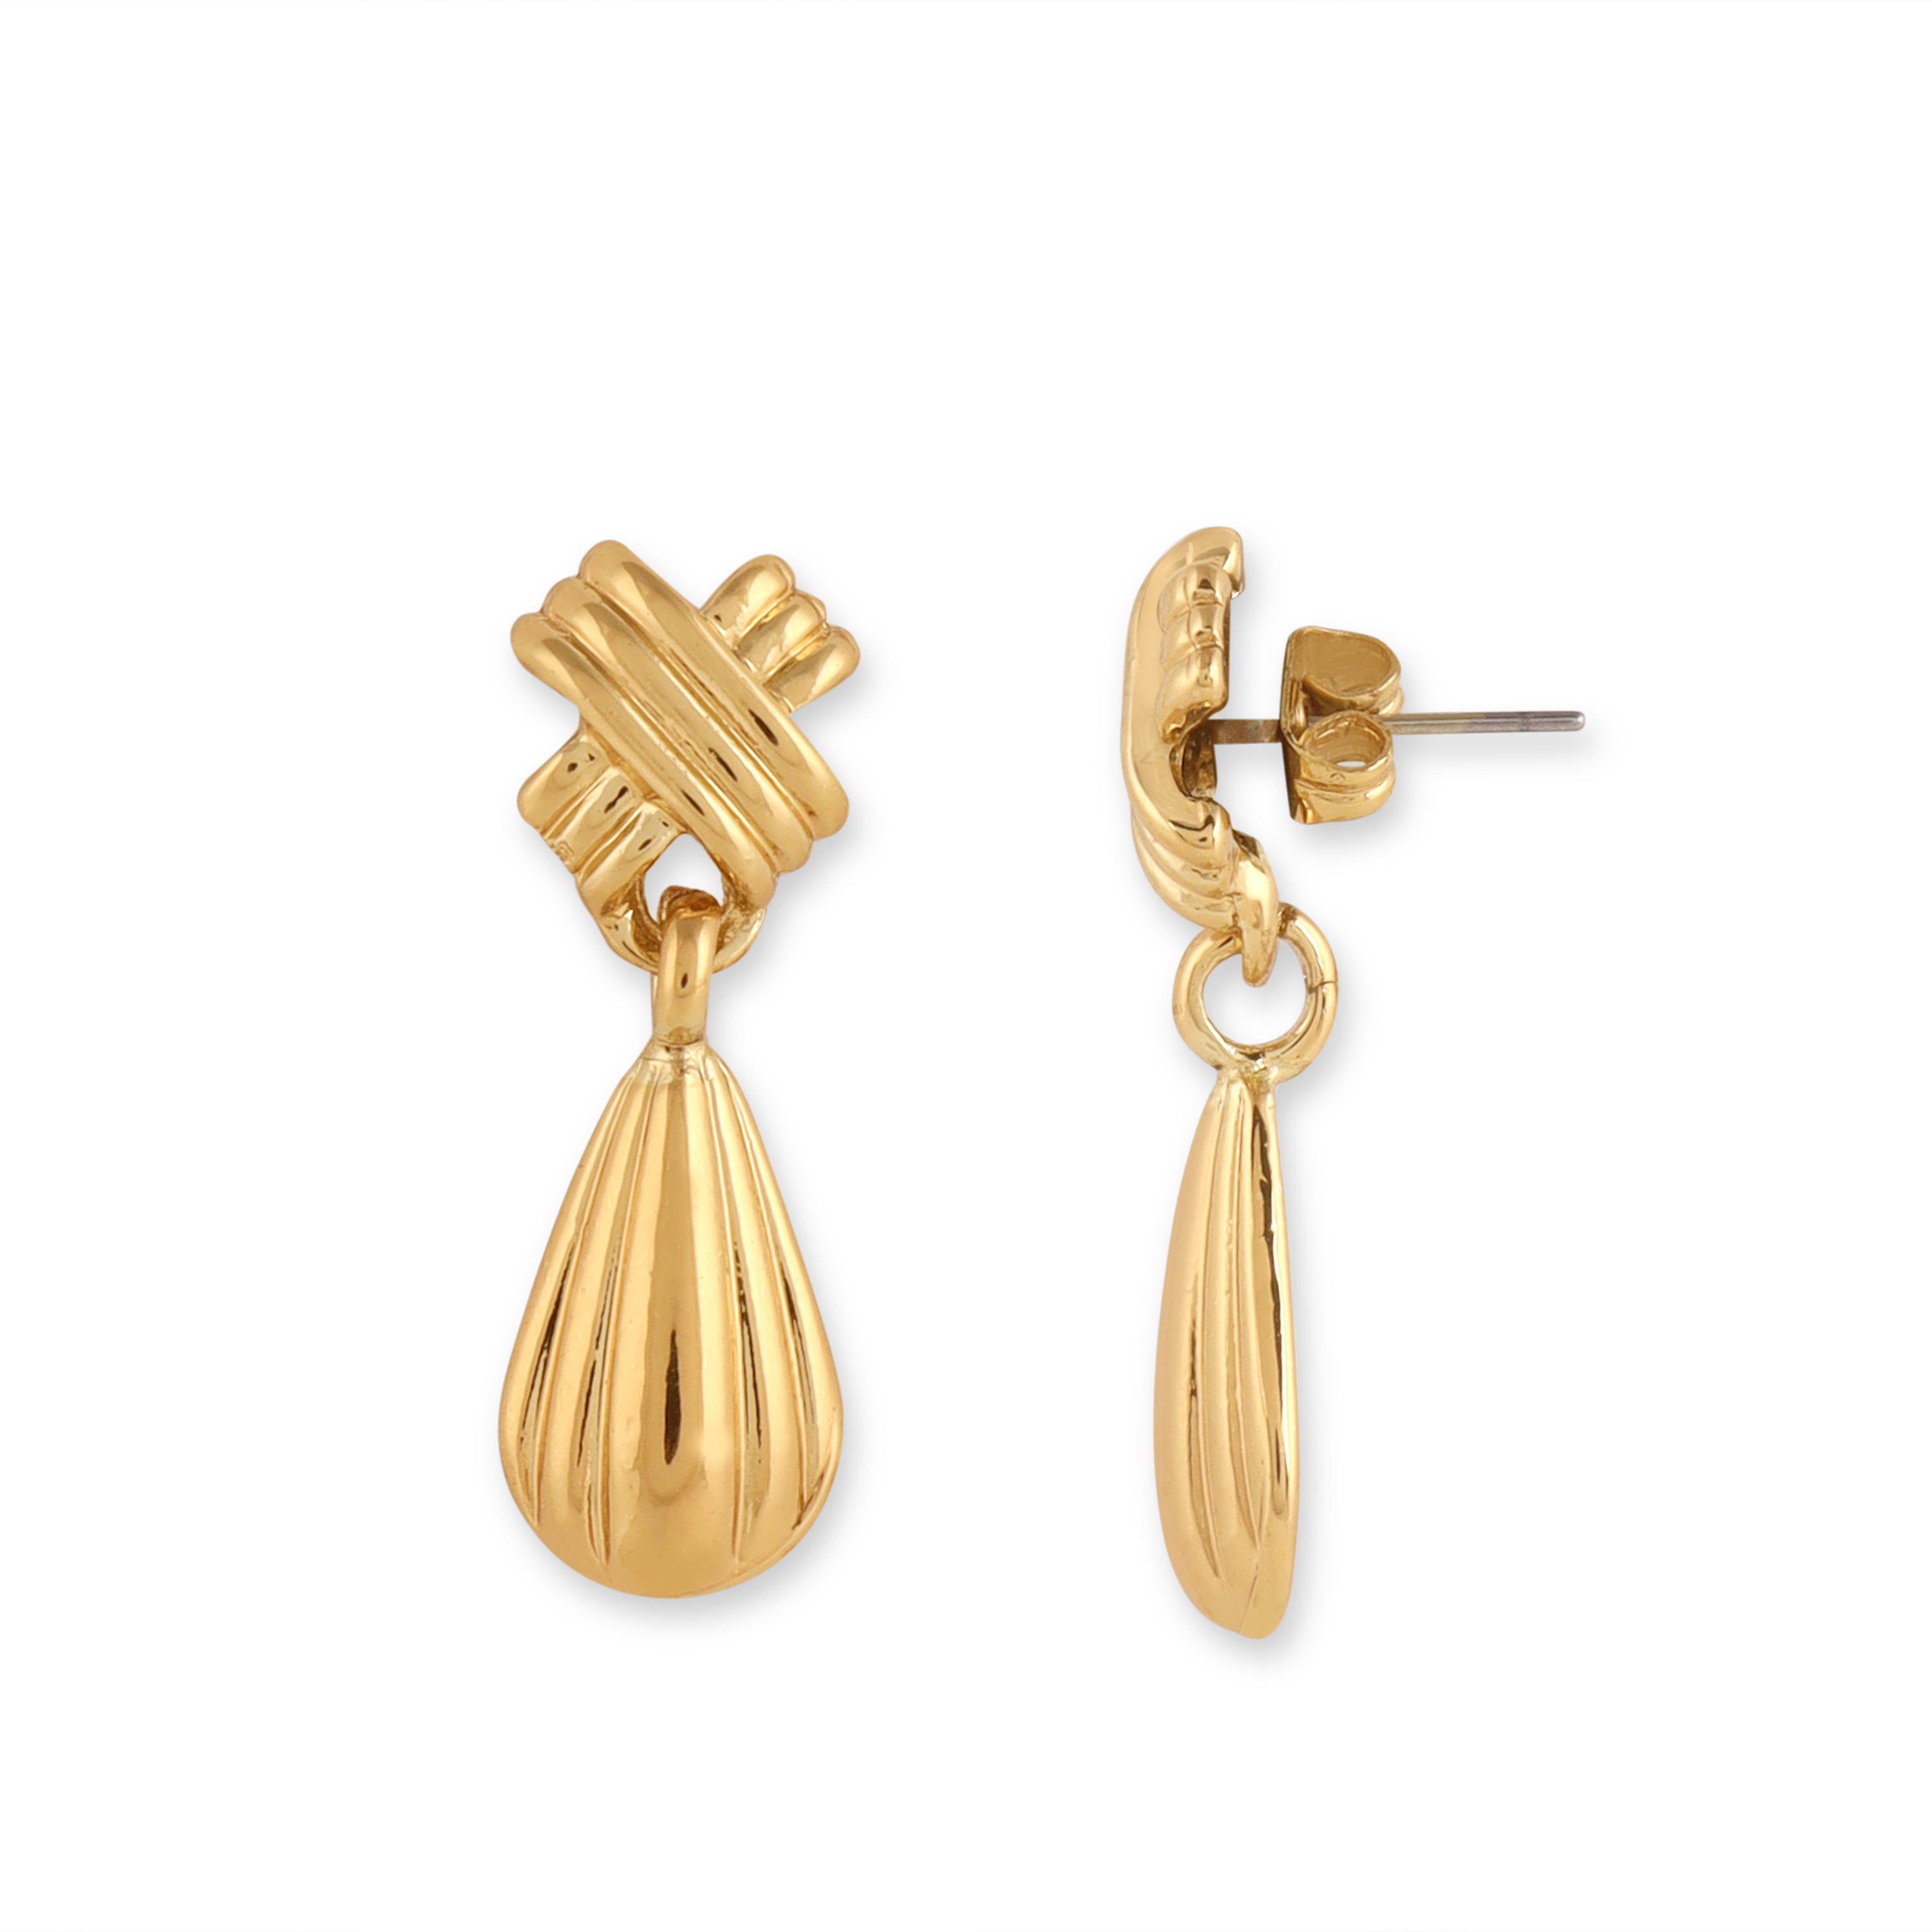 TFC  Spitfire Small Gold Plated Earrings-Discover daily wear gold earrings including stud earrings, hoop earrings, and pearl earrings, perfect as earrings for women and earrings for girls.Find the cheapest fashion jewellery which is anti-tarnis​h only at The Fun company